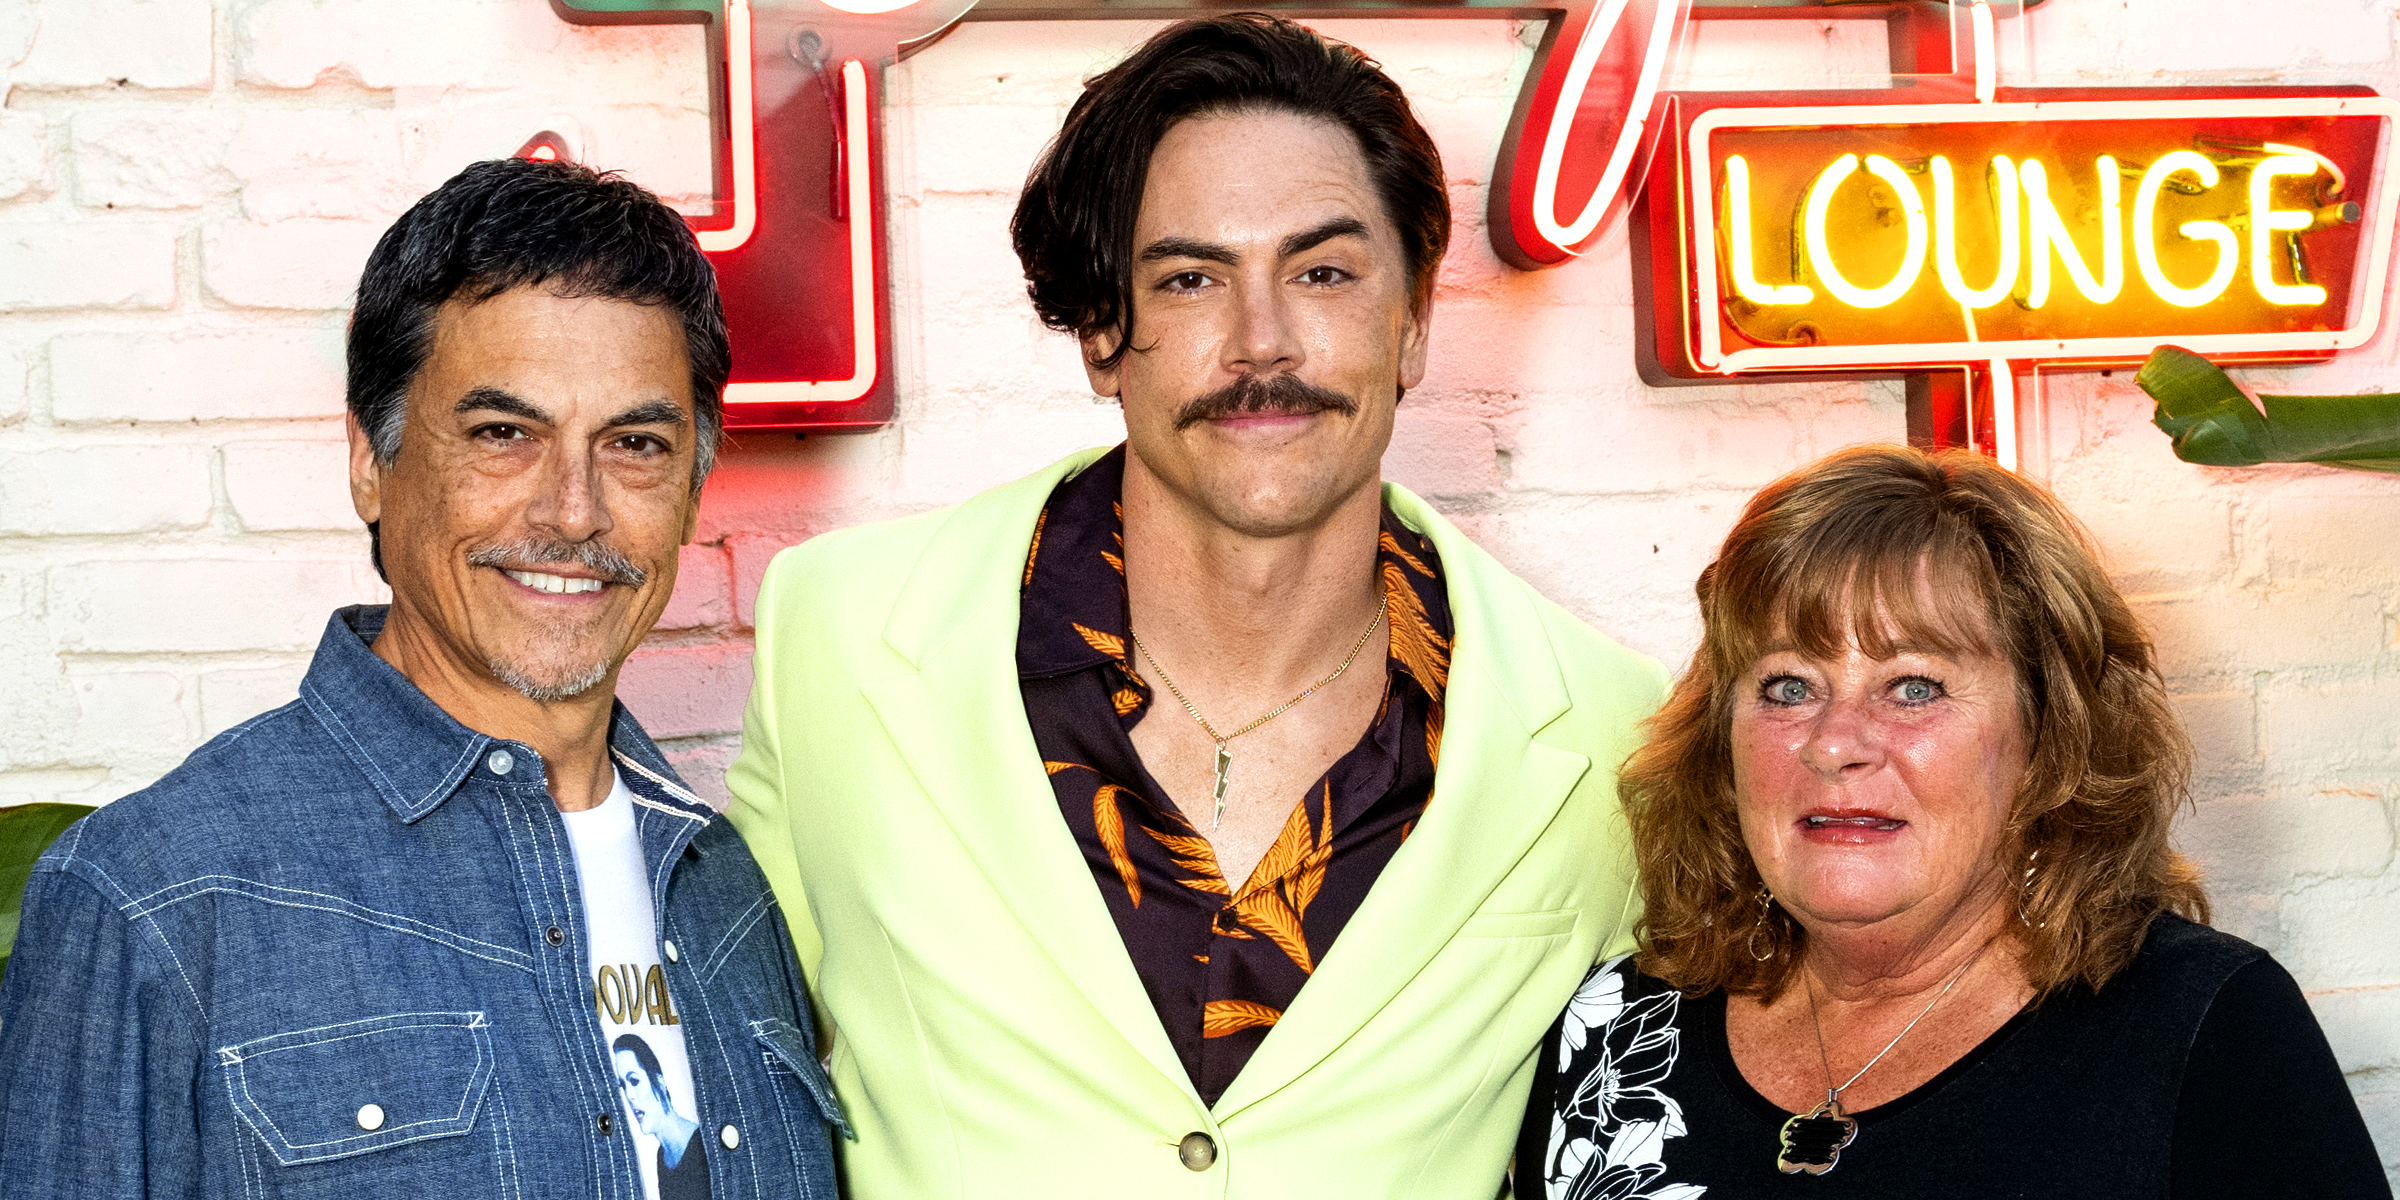 Tony Sandoval, Tom Sandoval, and Terri Green | Source: Getty Images